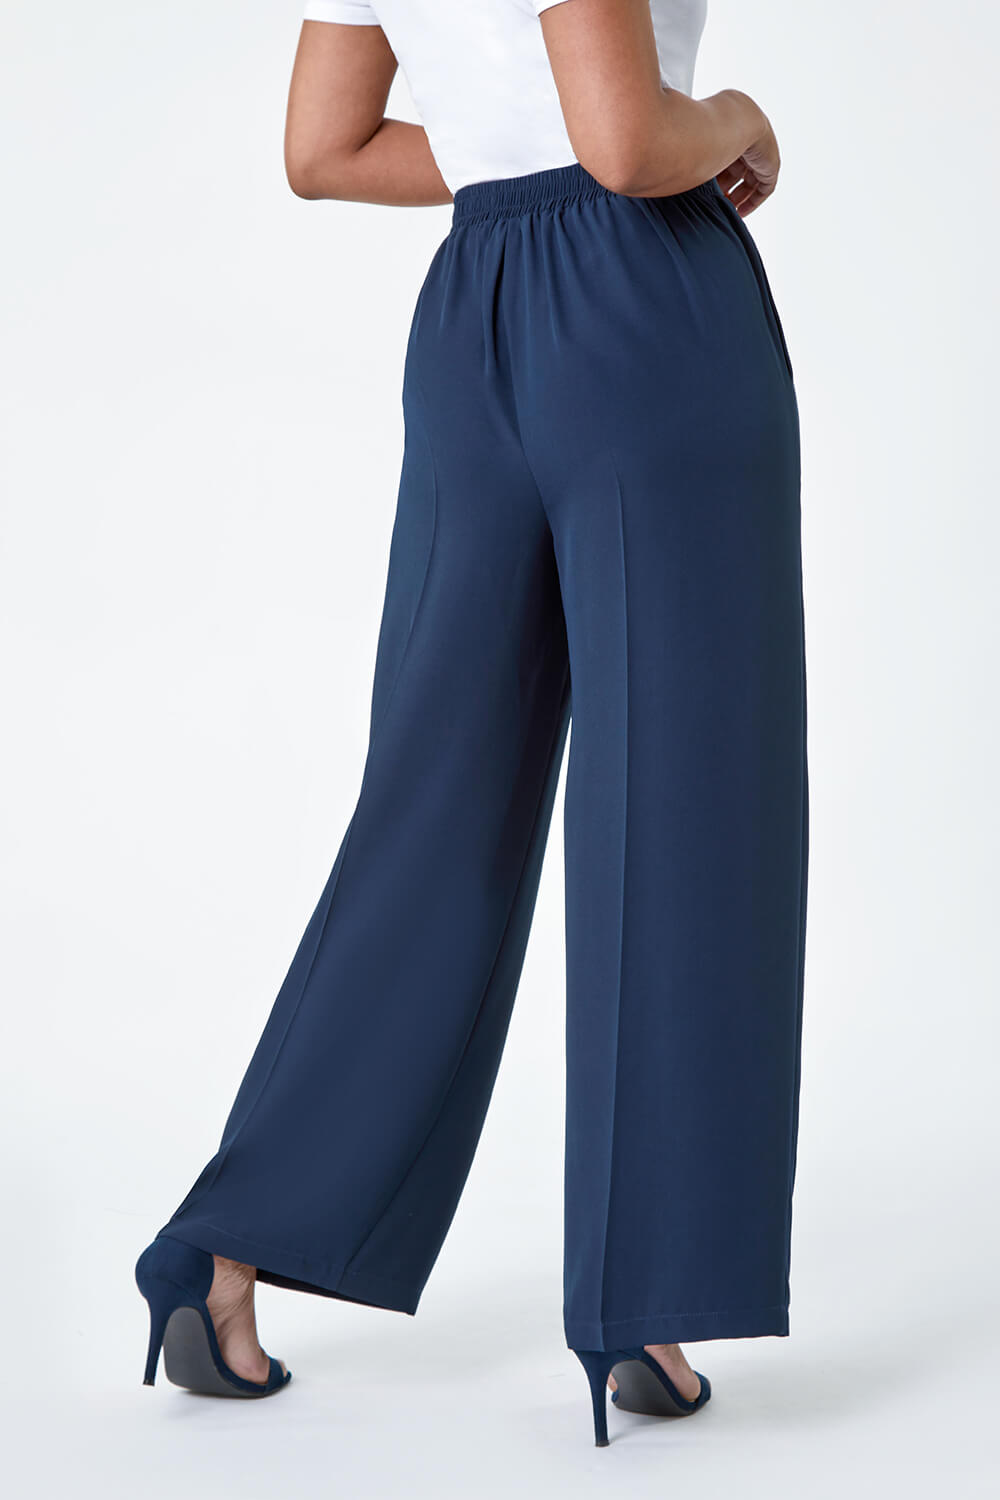 Navy  Petite Pocket Wide Leg Trousers, Image 3 of 5